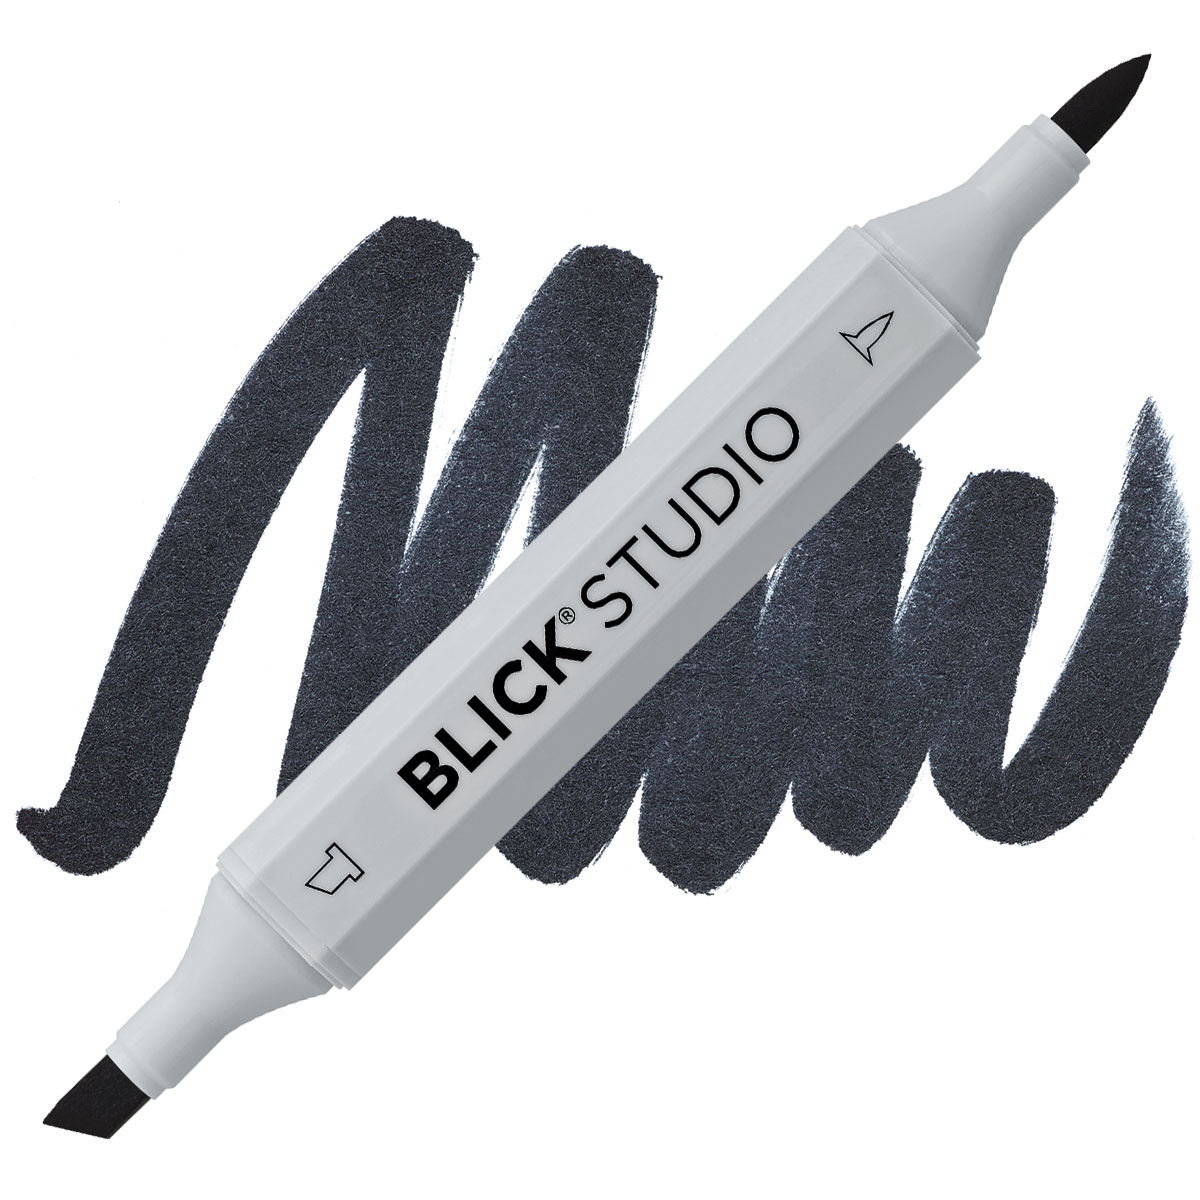 Blick Studio Brush Markers - Assorted Colors, Set of 12